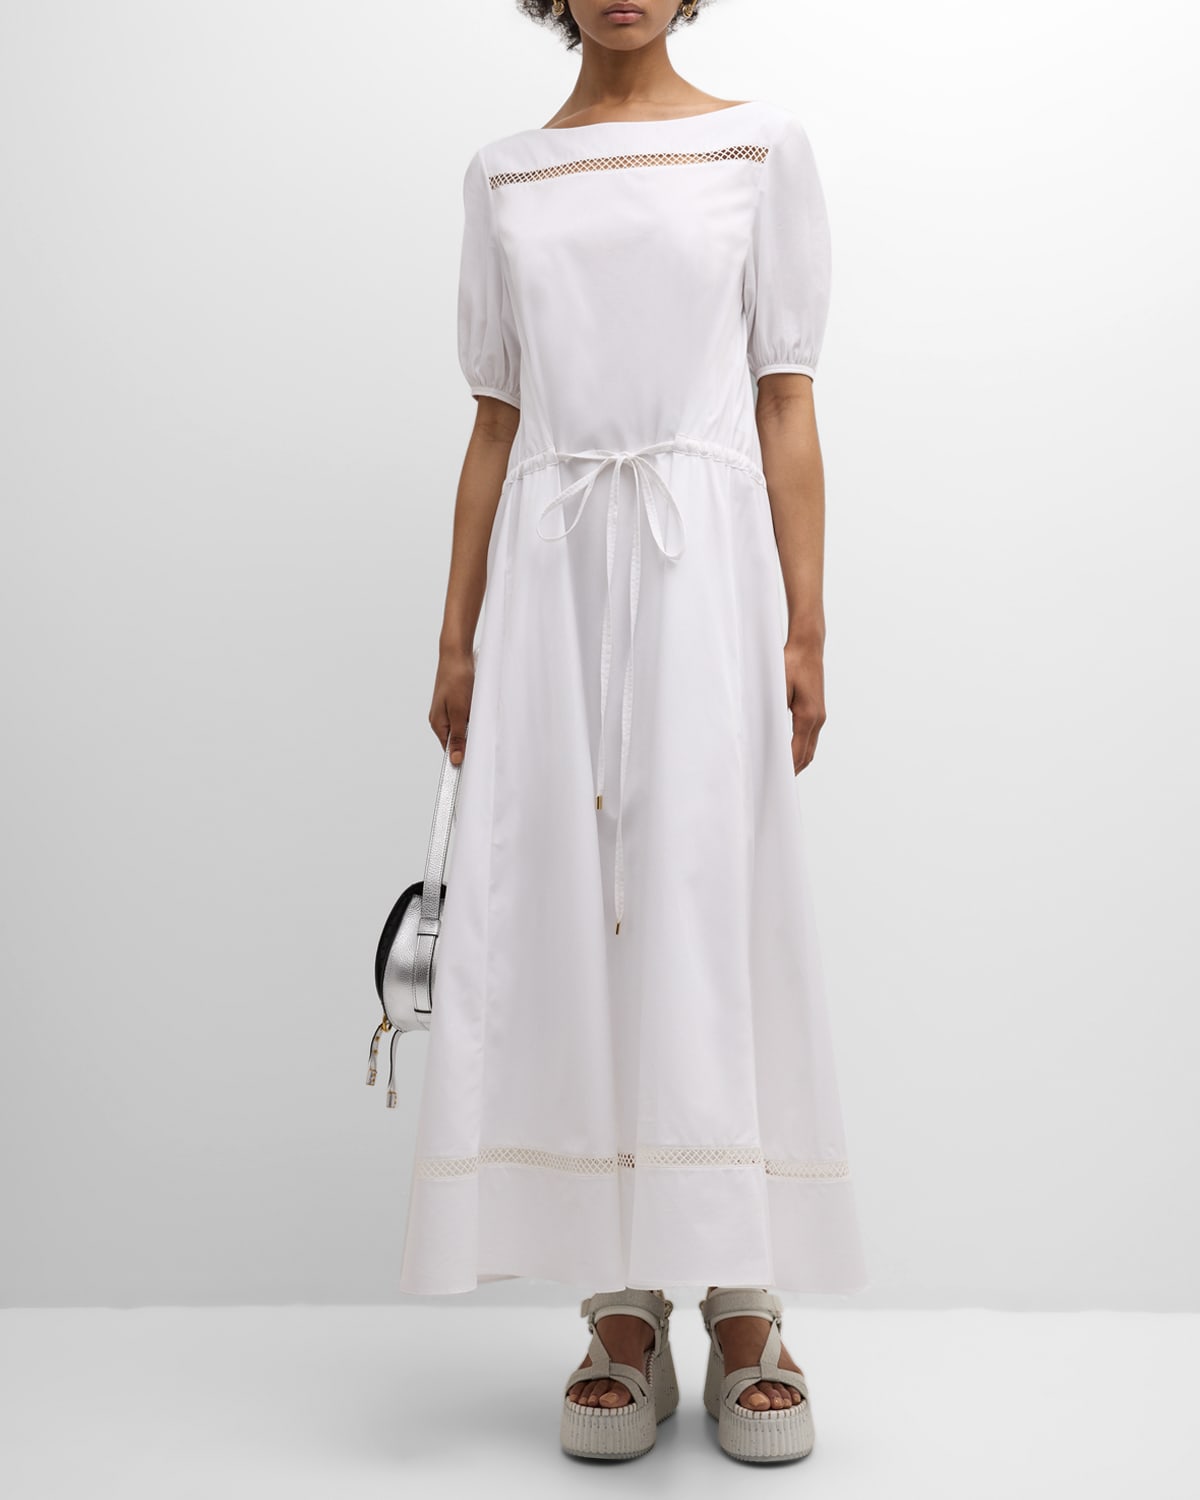 x High Summer Poplin Maxi Dress with Netted Detailing